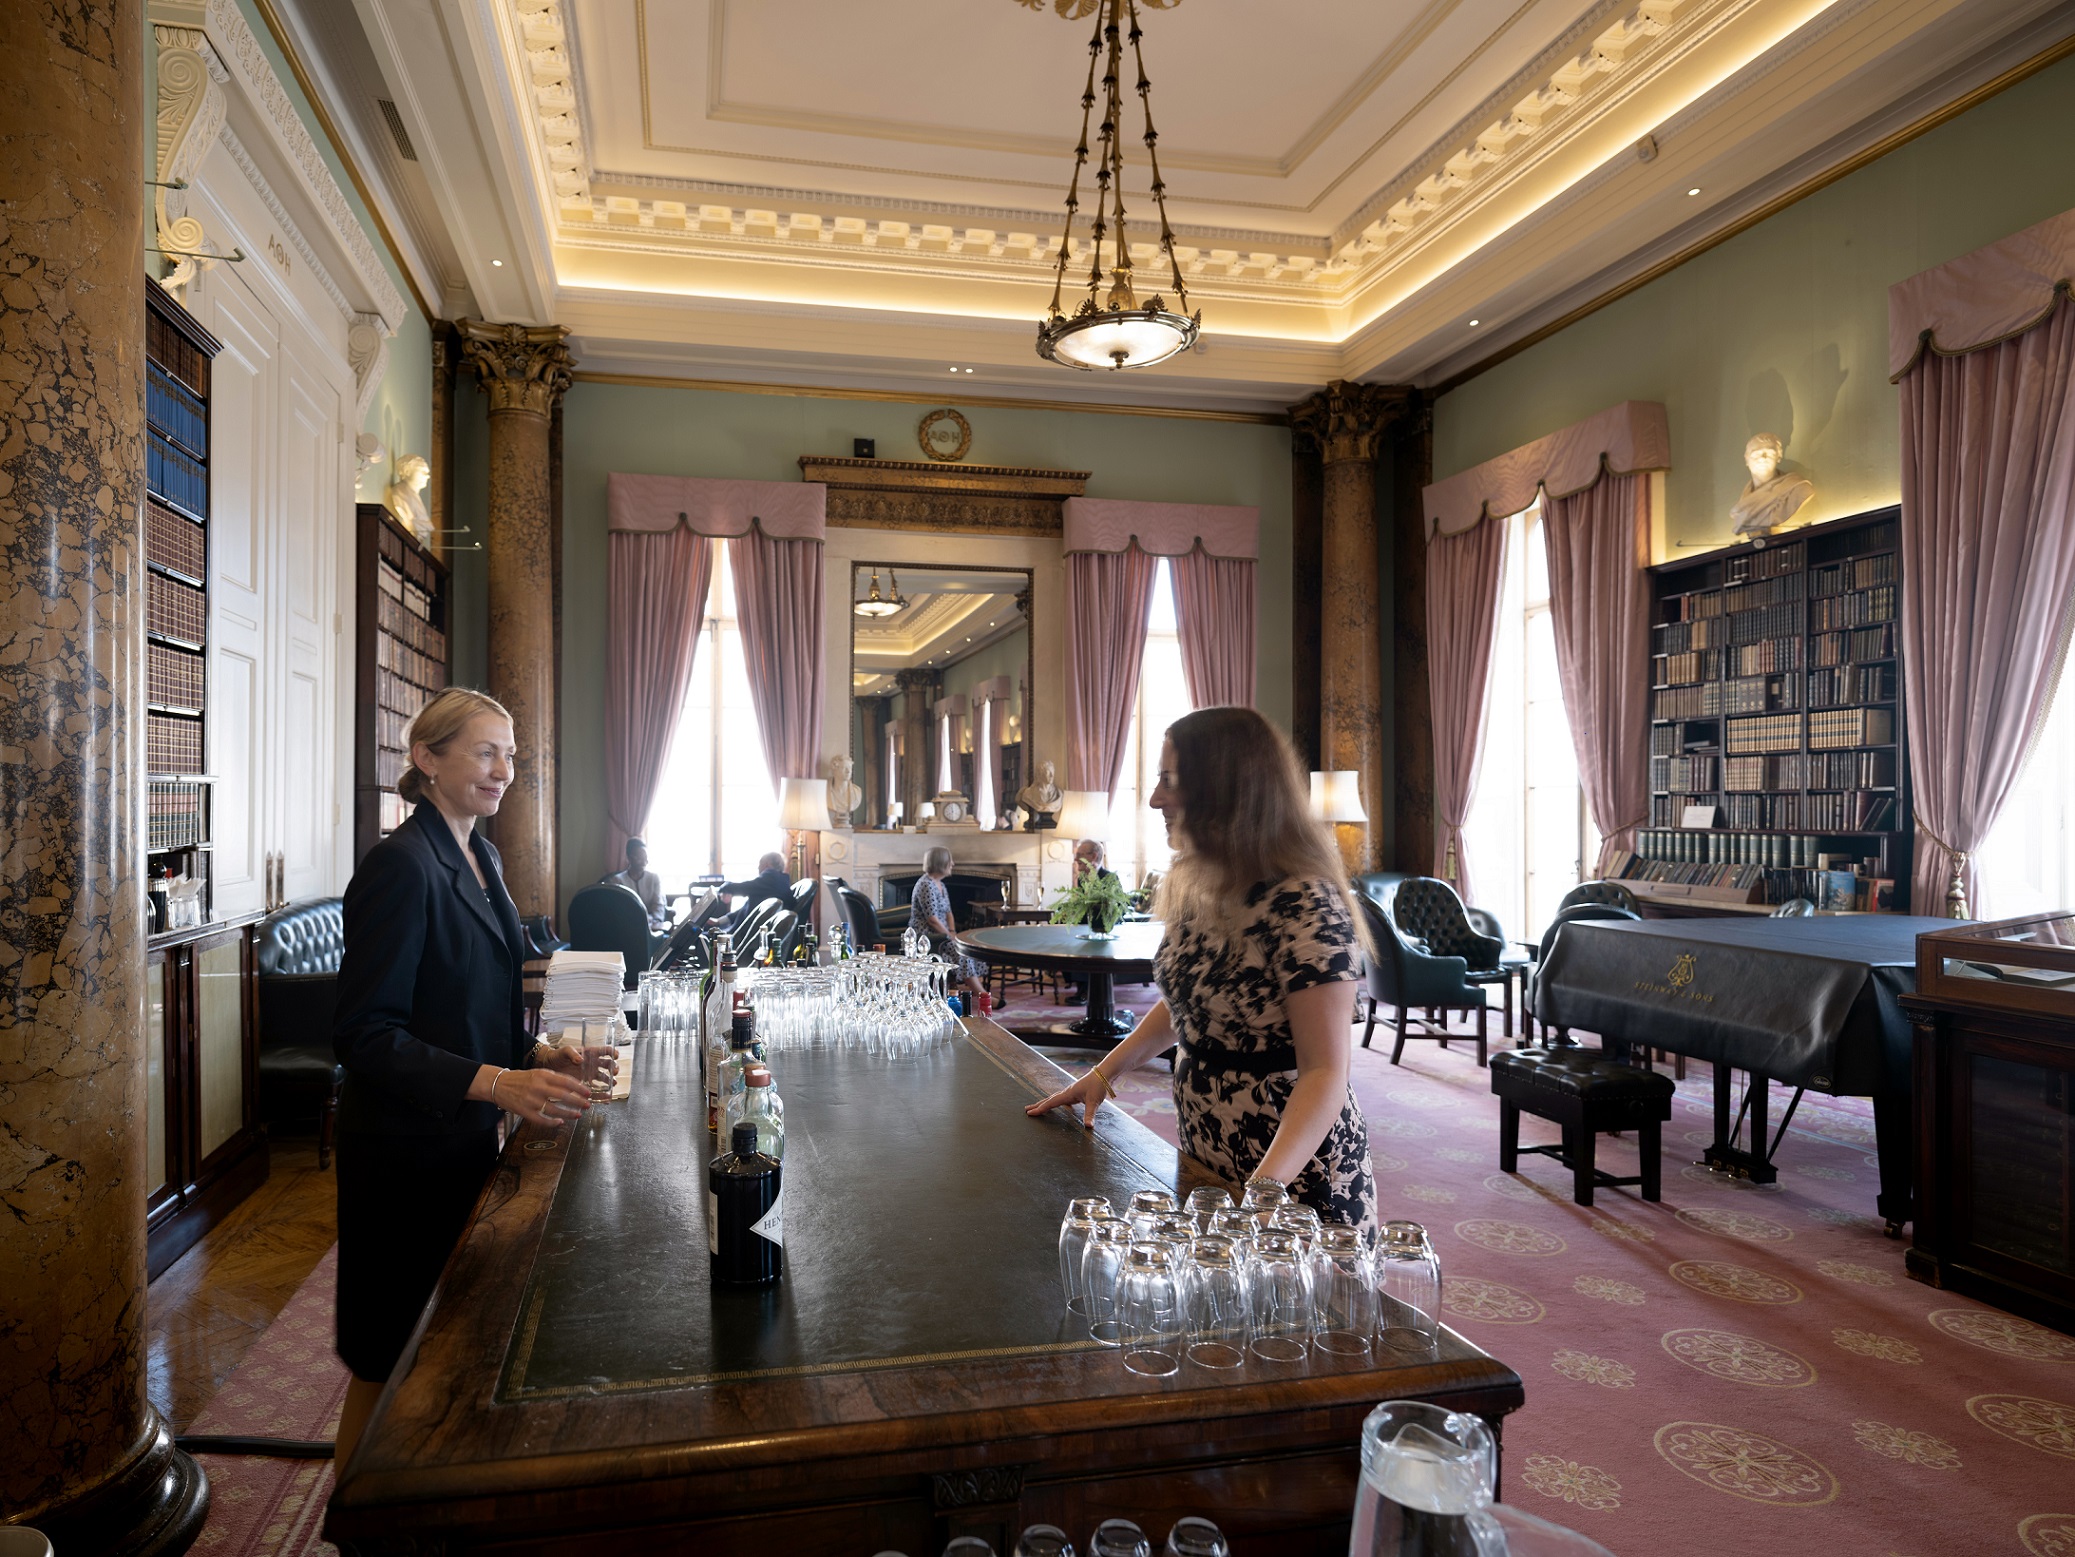 Member of staff serving a drink to a member at the Drawing Room bar